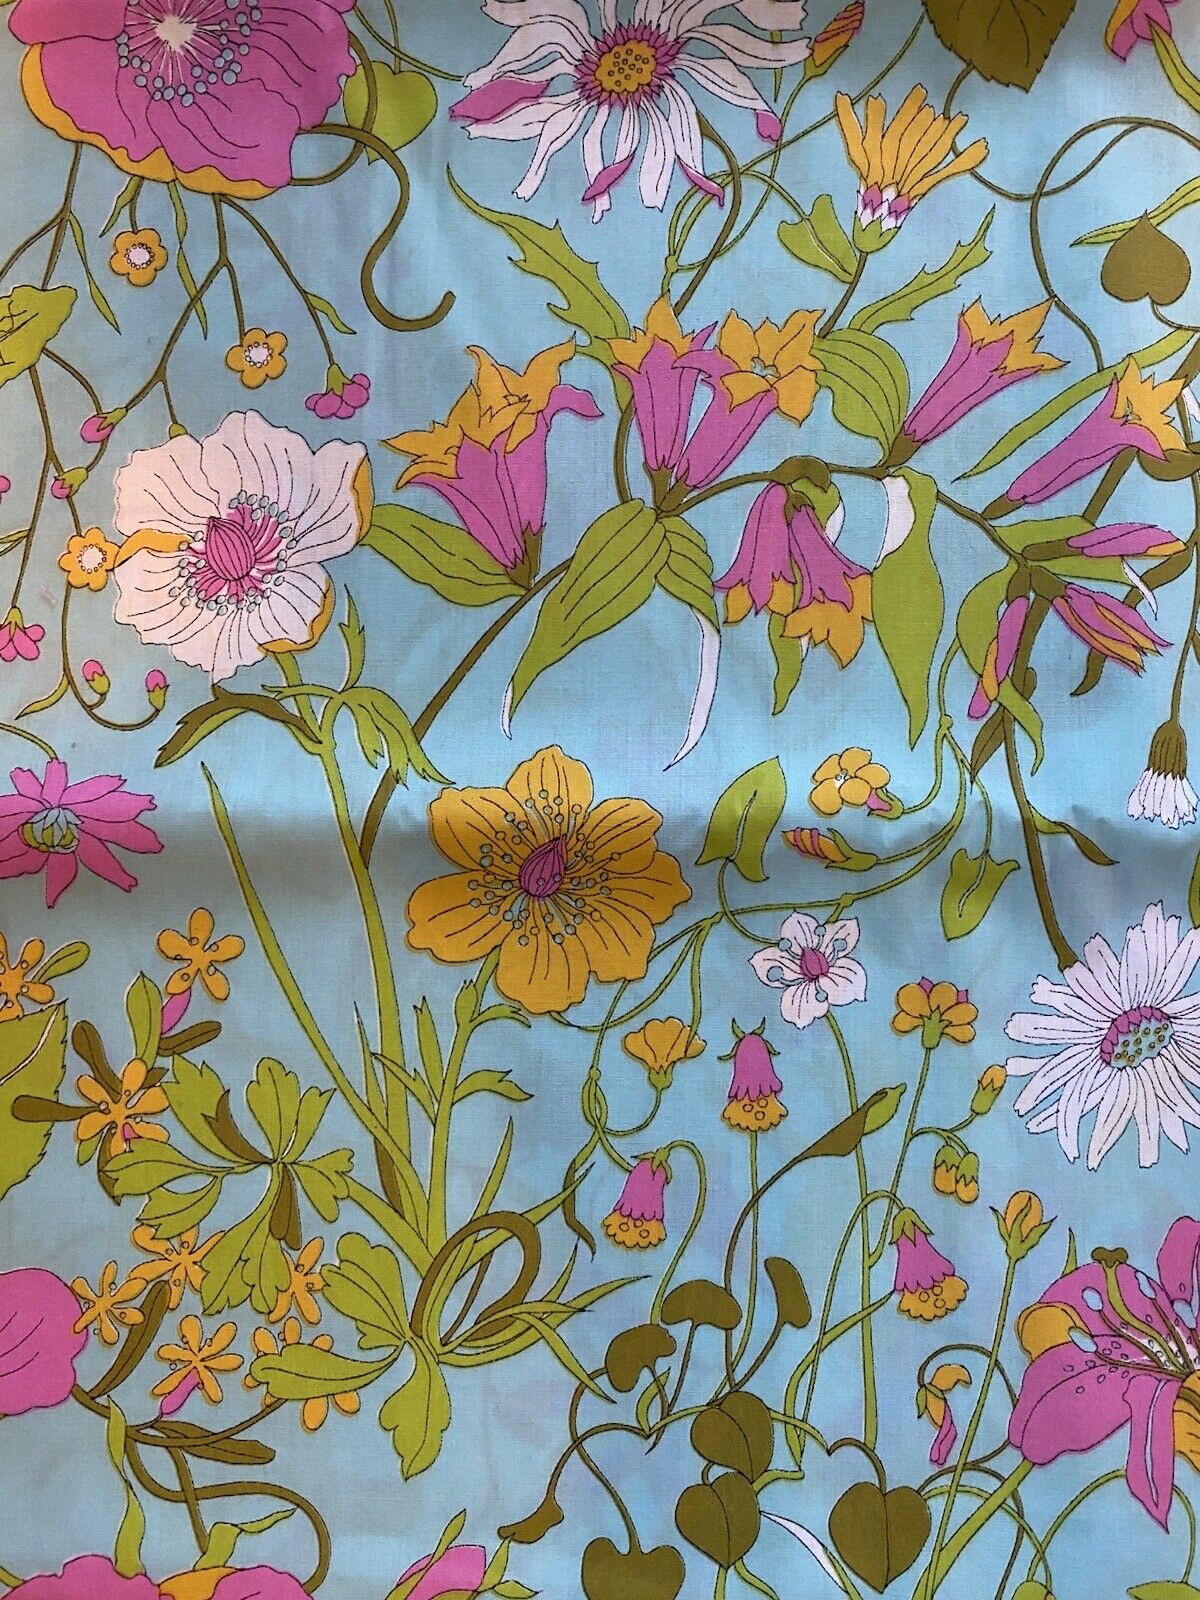 Vintage Floral Fabric Bright Pink Poppies Wildflower Lt Blue Background 44x124”